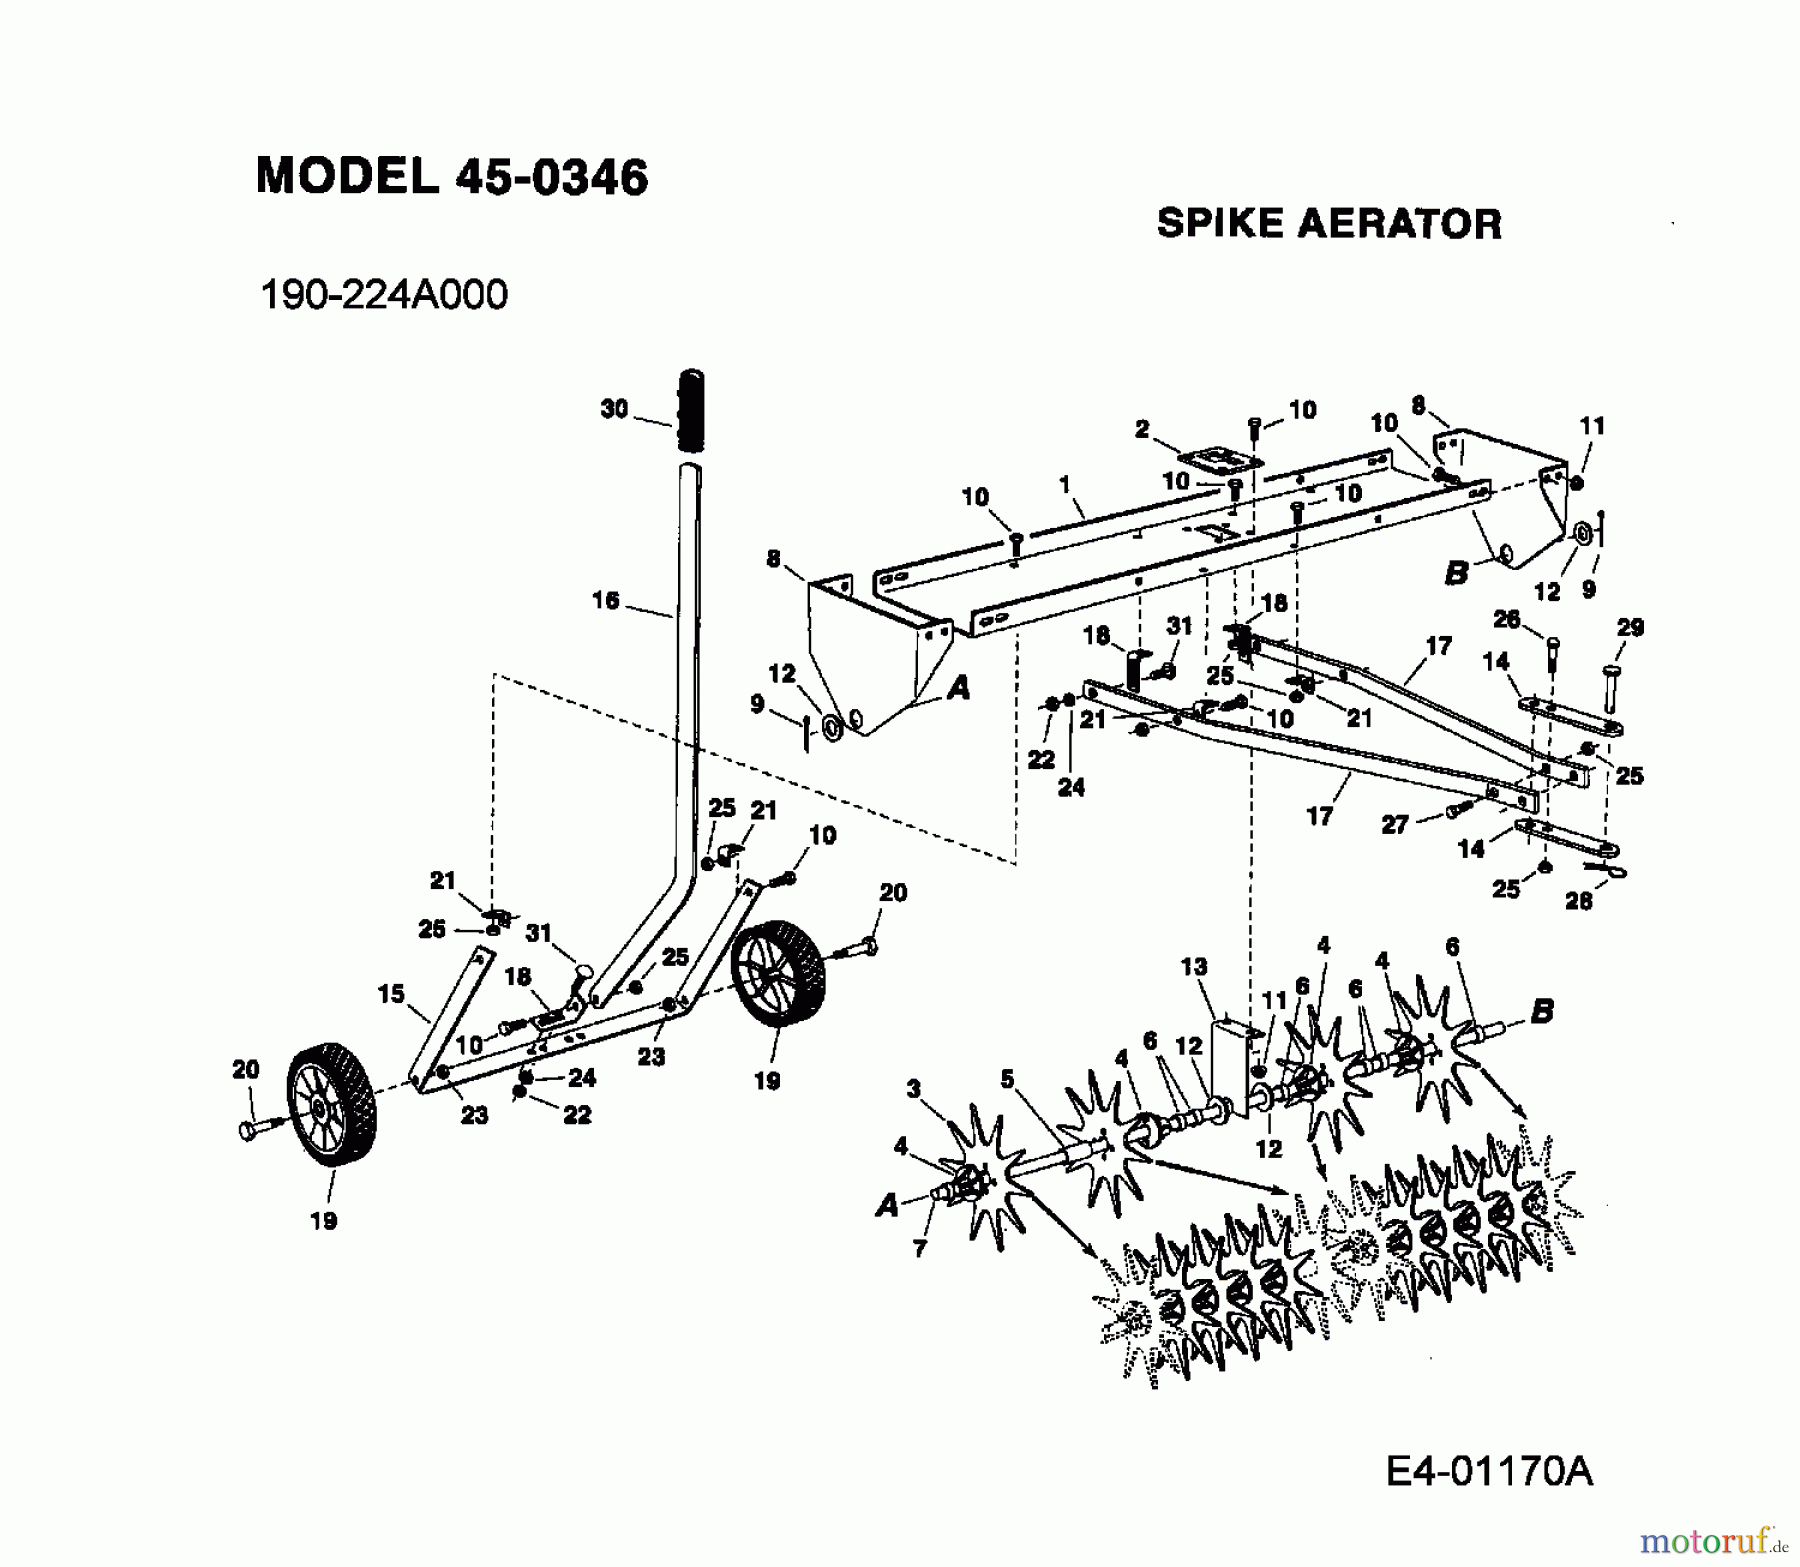  MTD Accessories Accessories garden and lawn tractors Groomer 45-0346  (190-224A000) 190-224A000  (2004) Basic machine